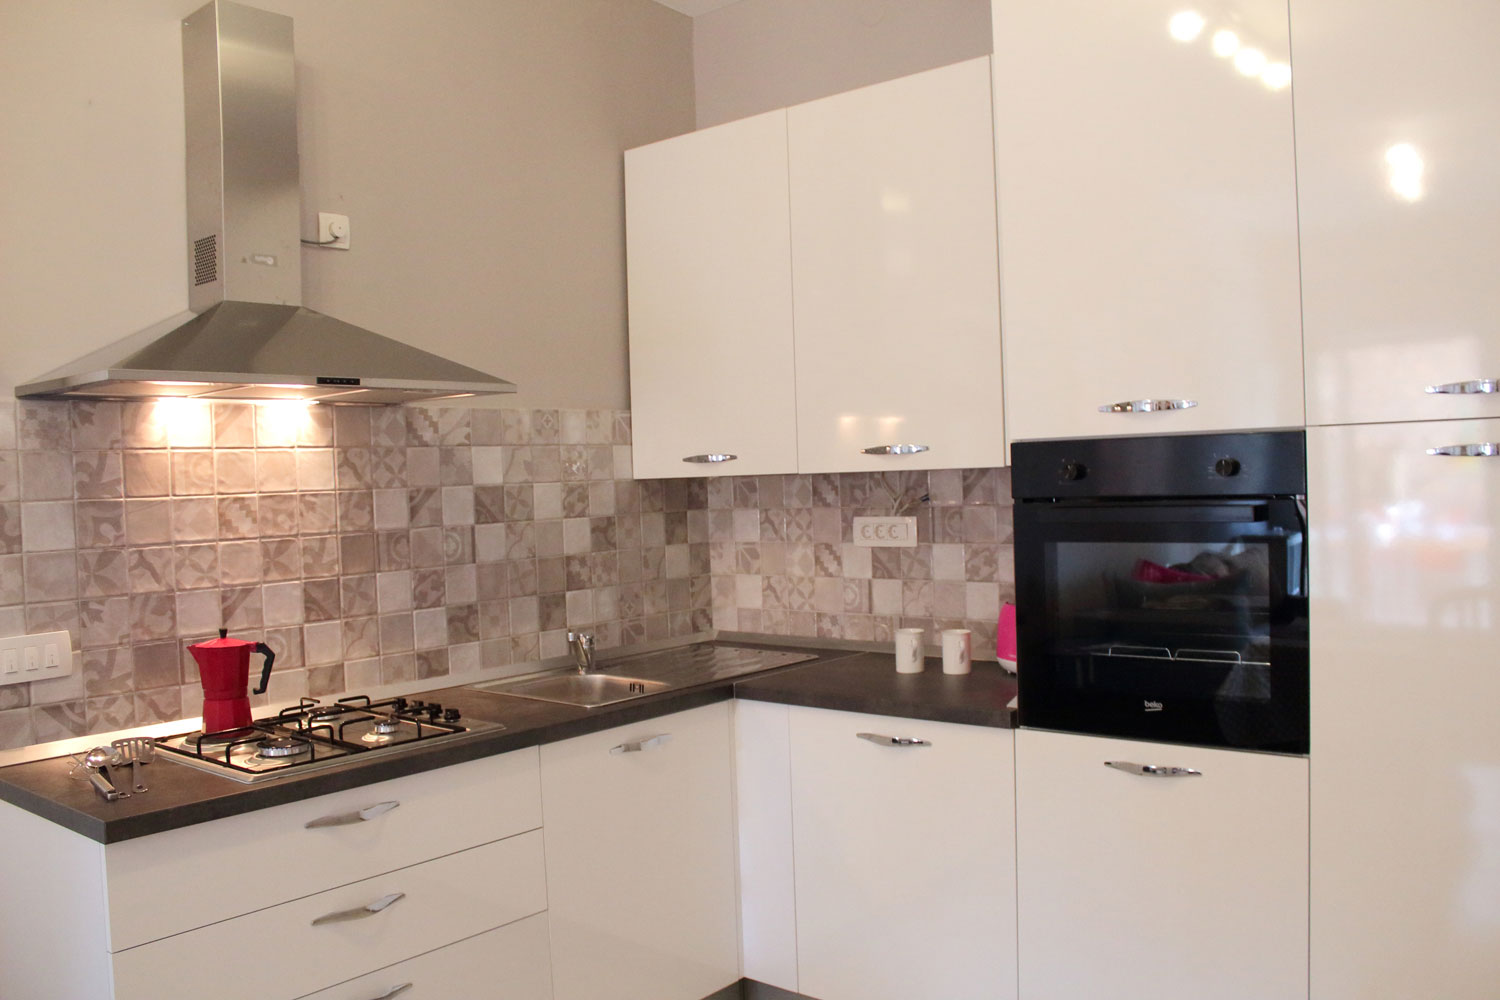 Apartment for rent in Lovran-Opatija, with fully equipped kitchen